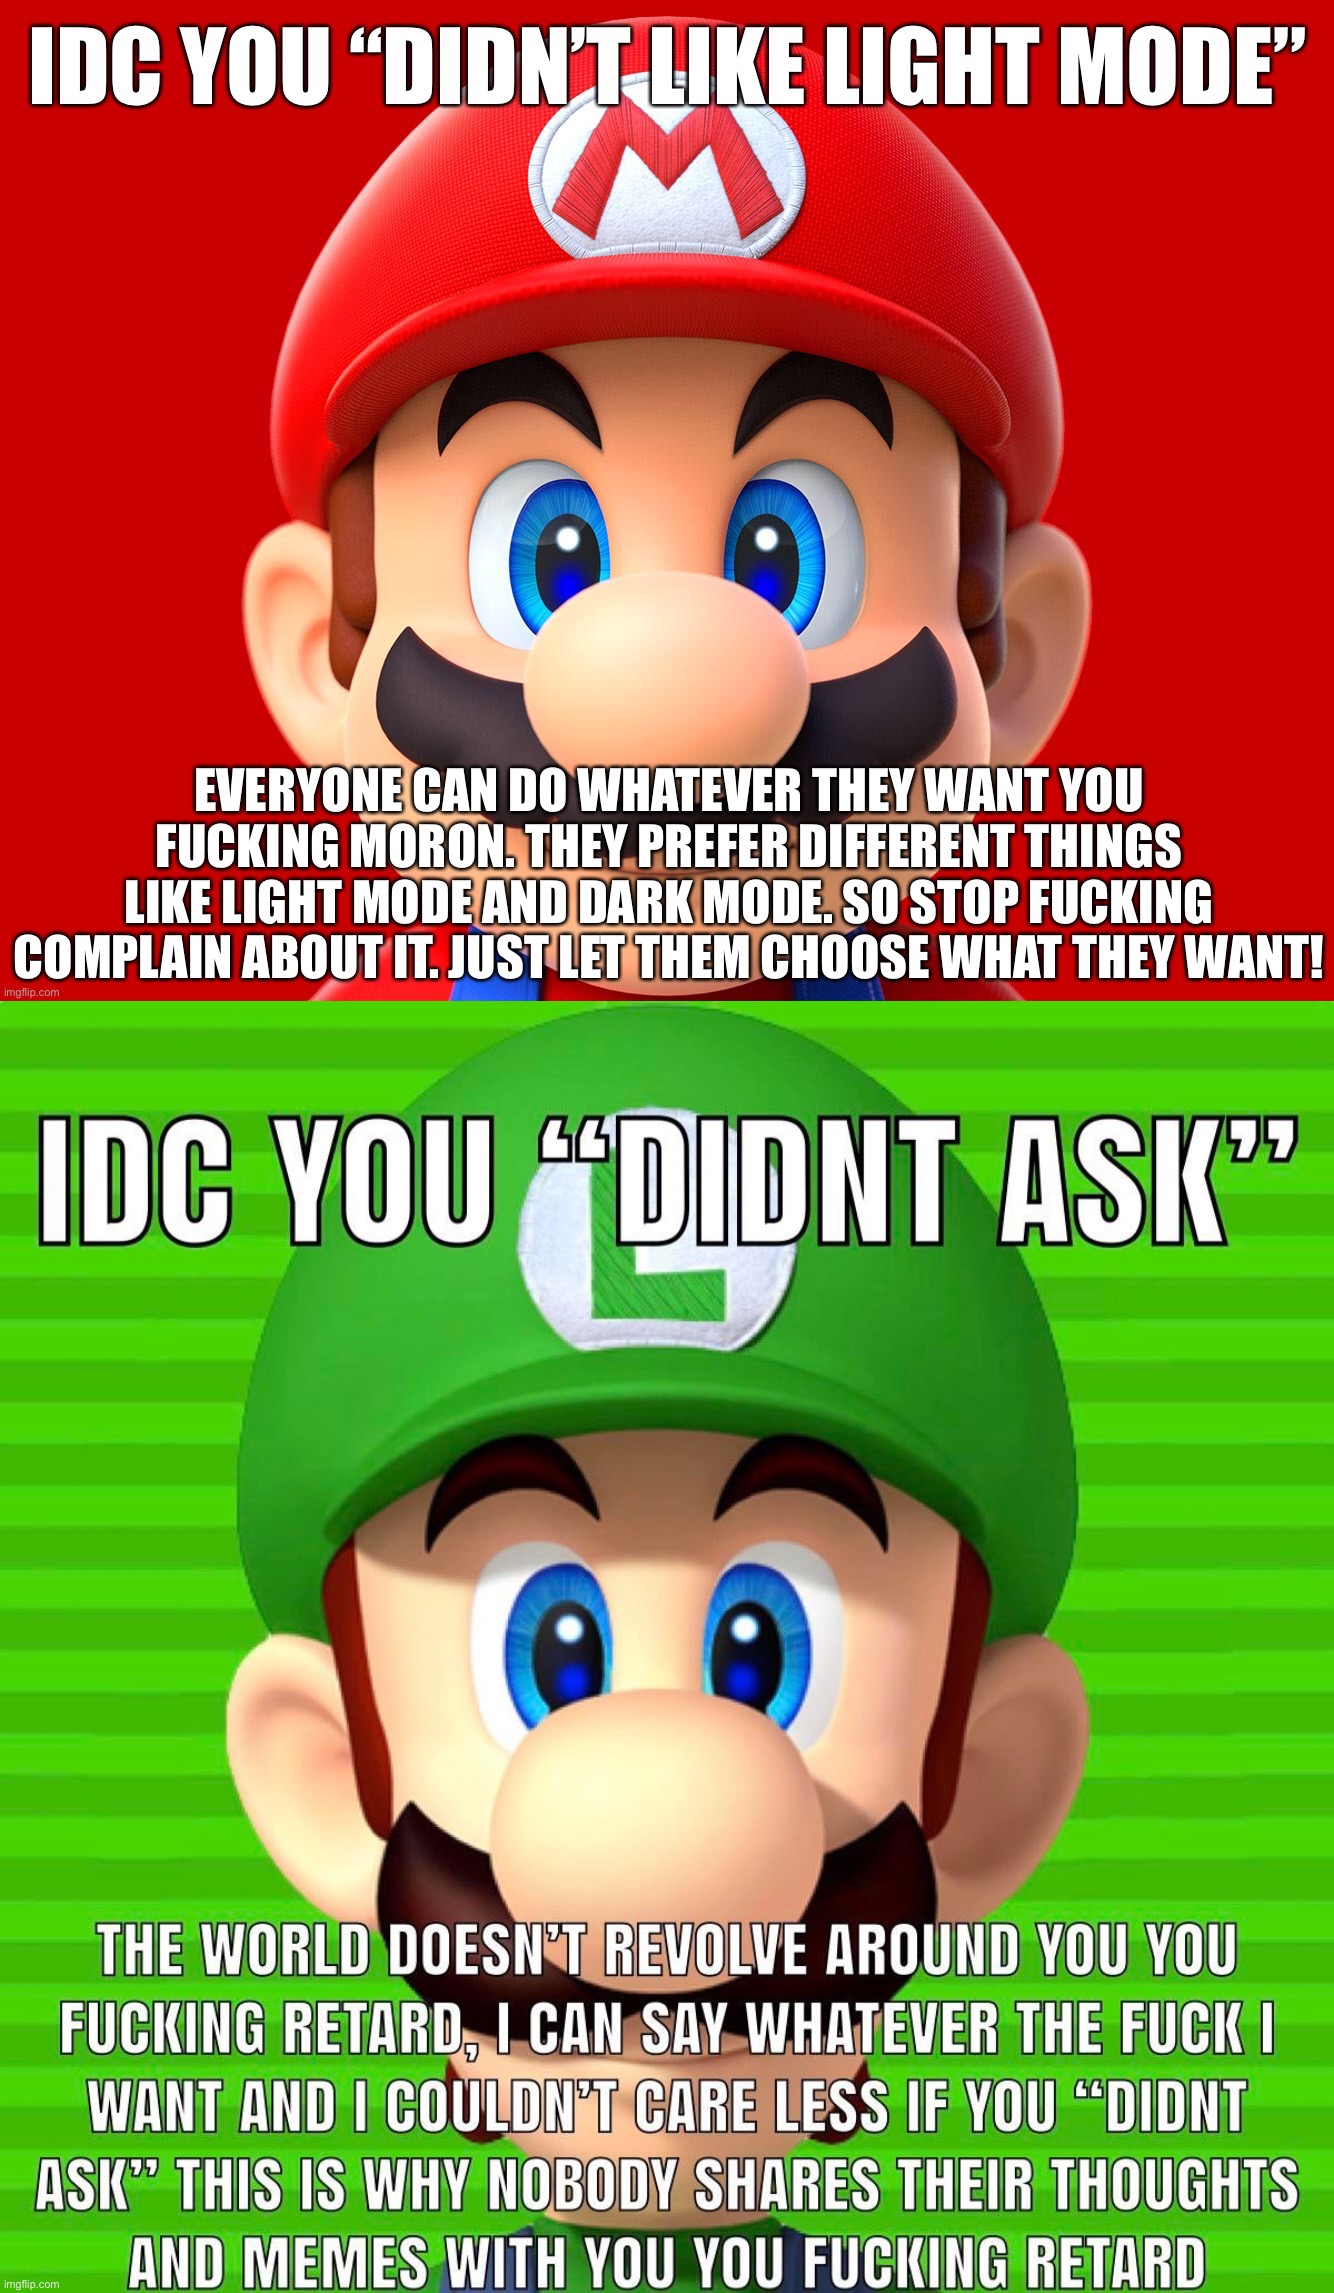 The “idc” bros | image tagged in idc you didn t like light mode mario,idc you didn t ask luigi | made w/ Imgflip meme maker